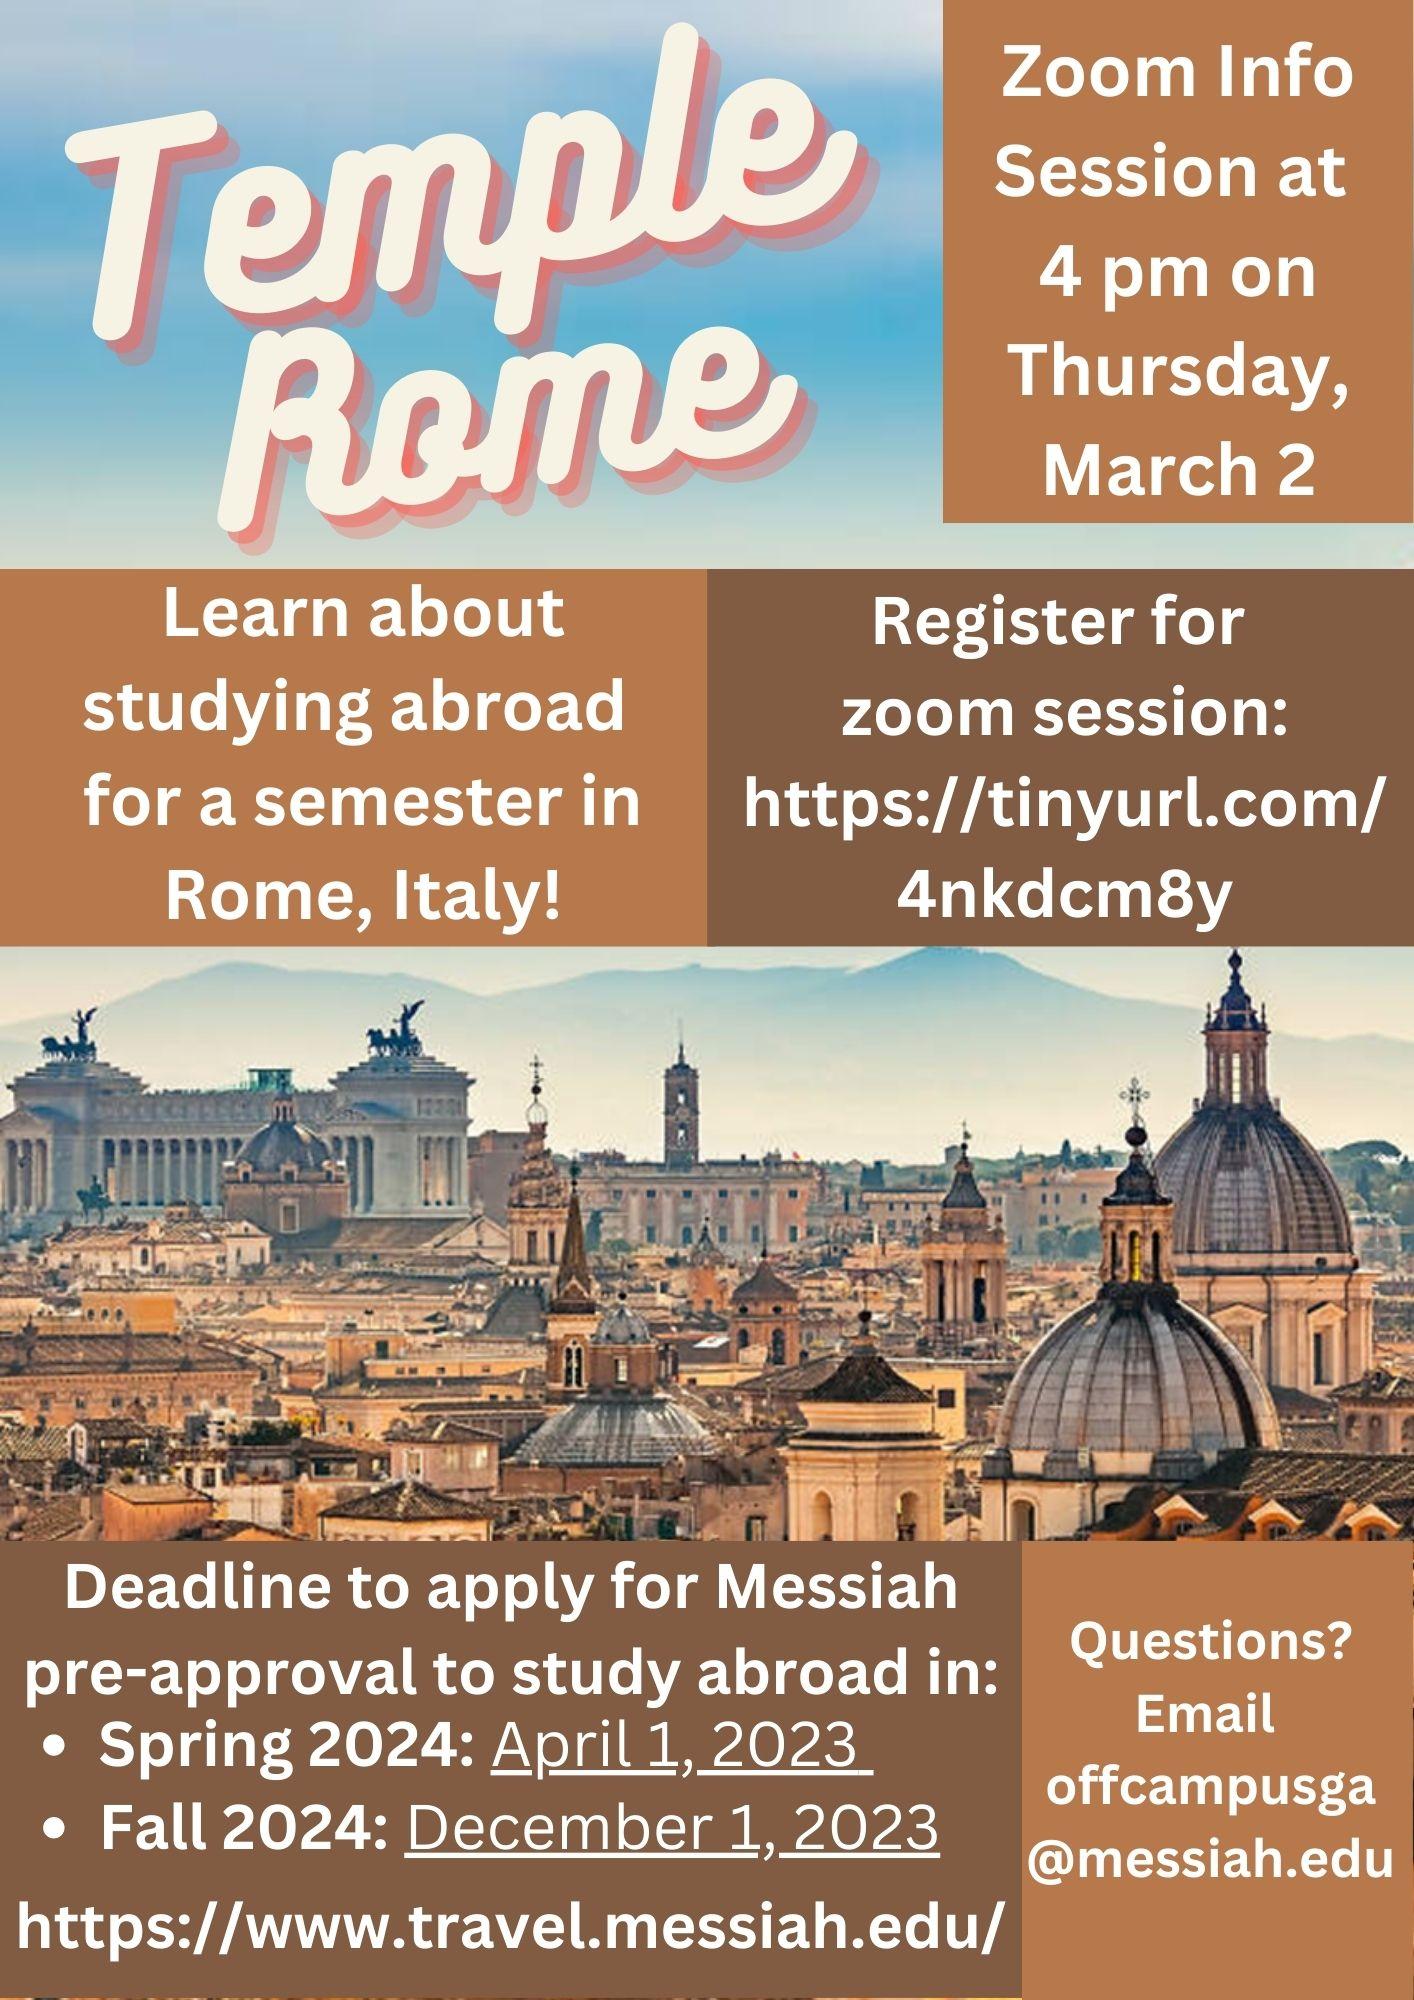 Temple rome info session poster